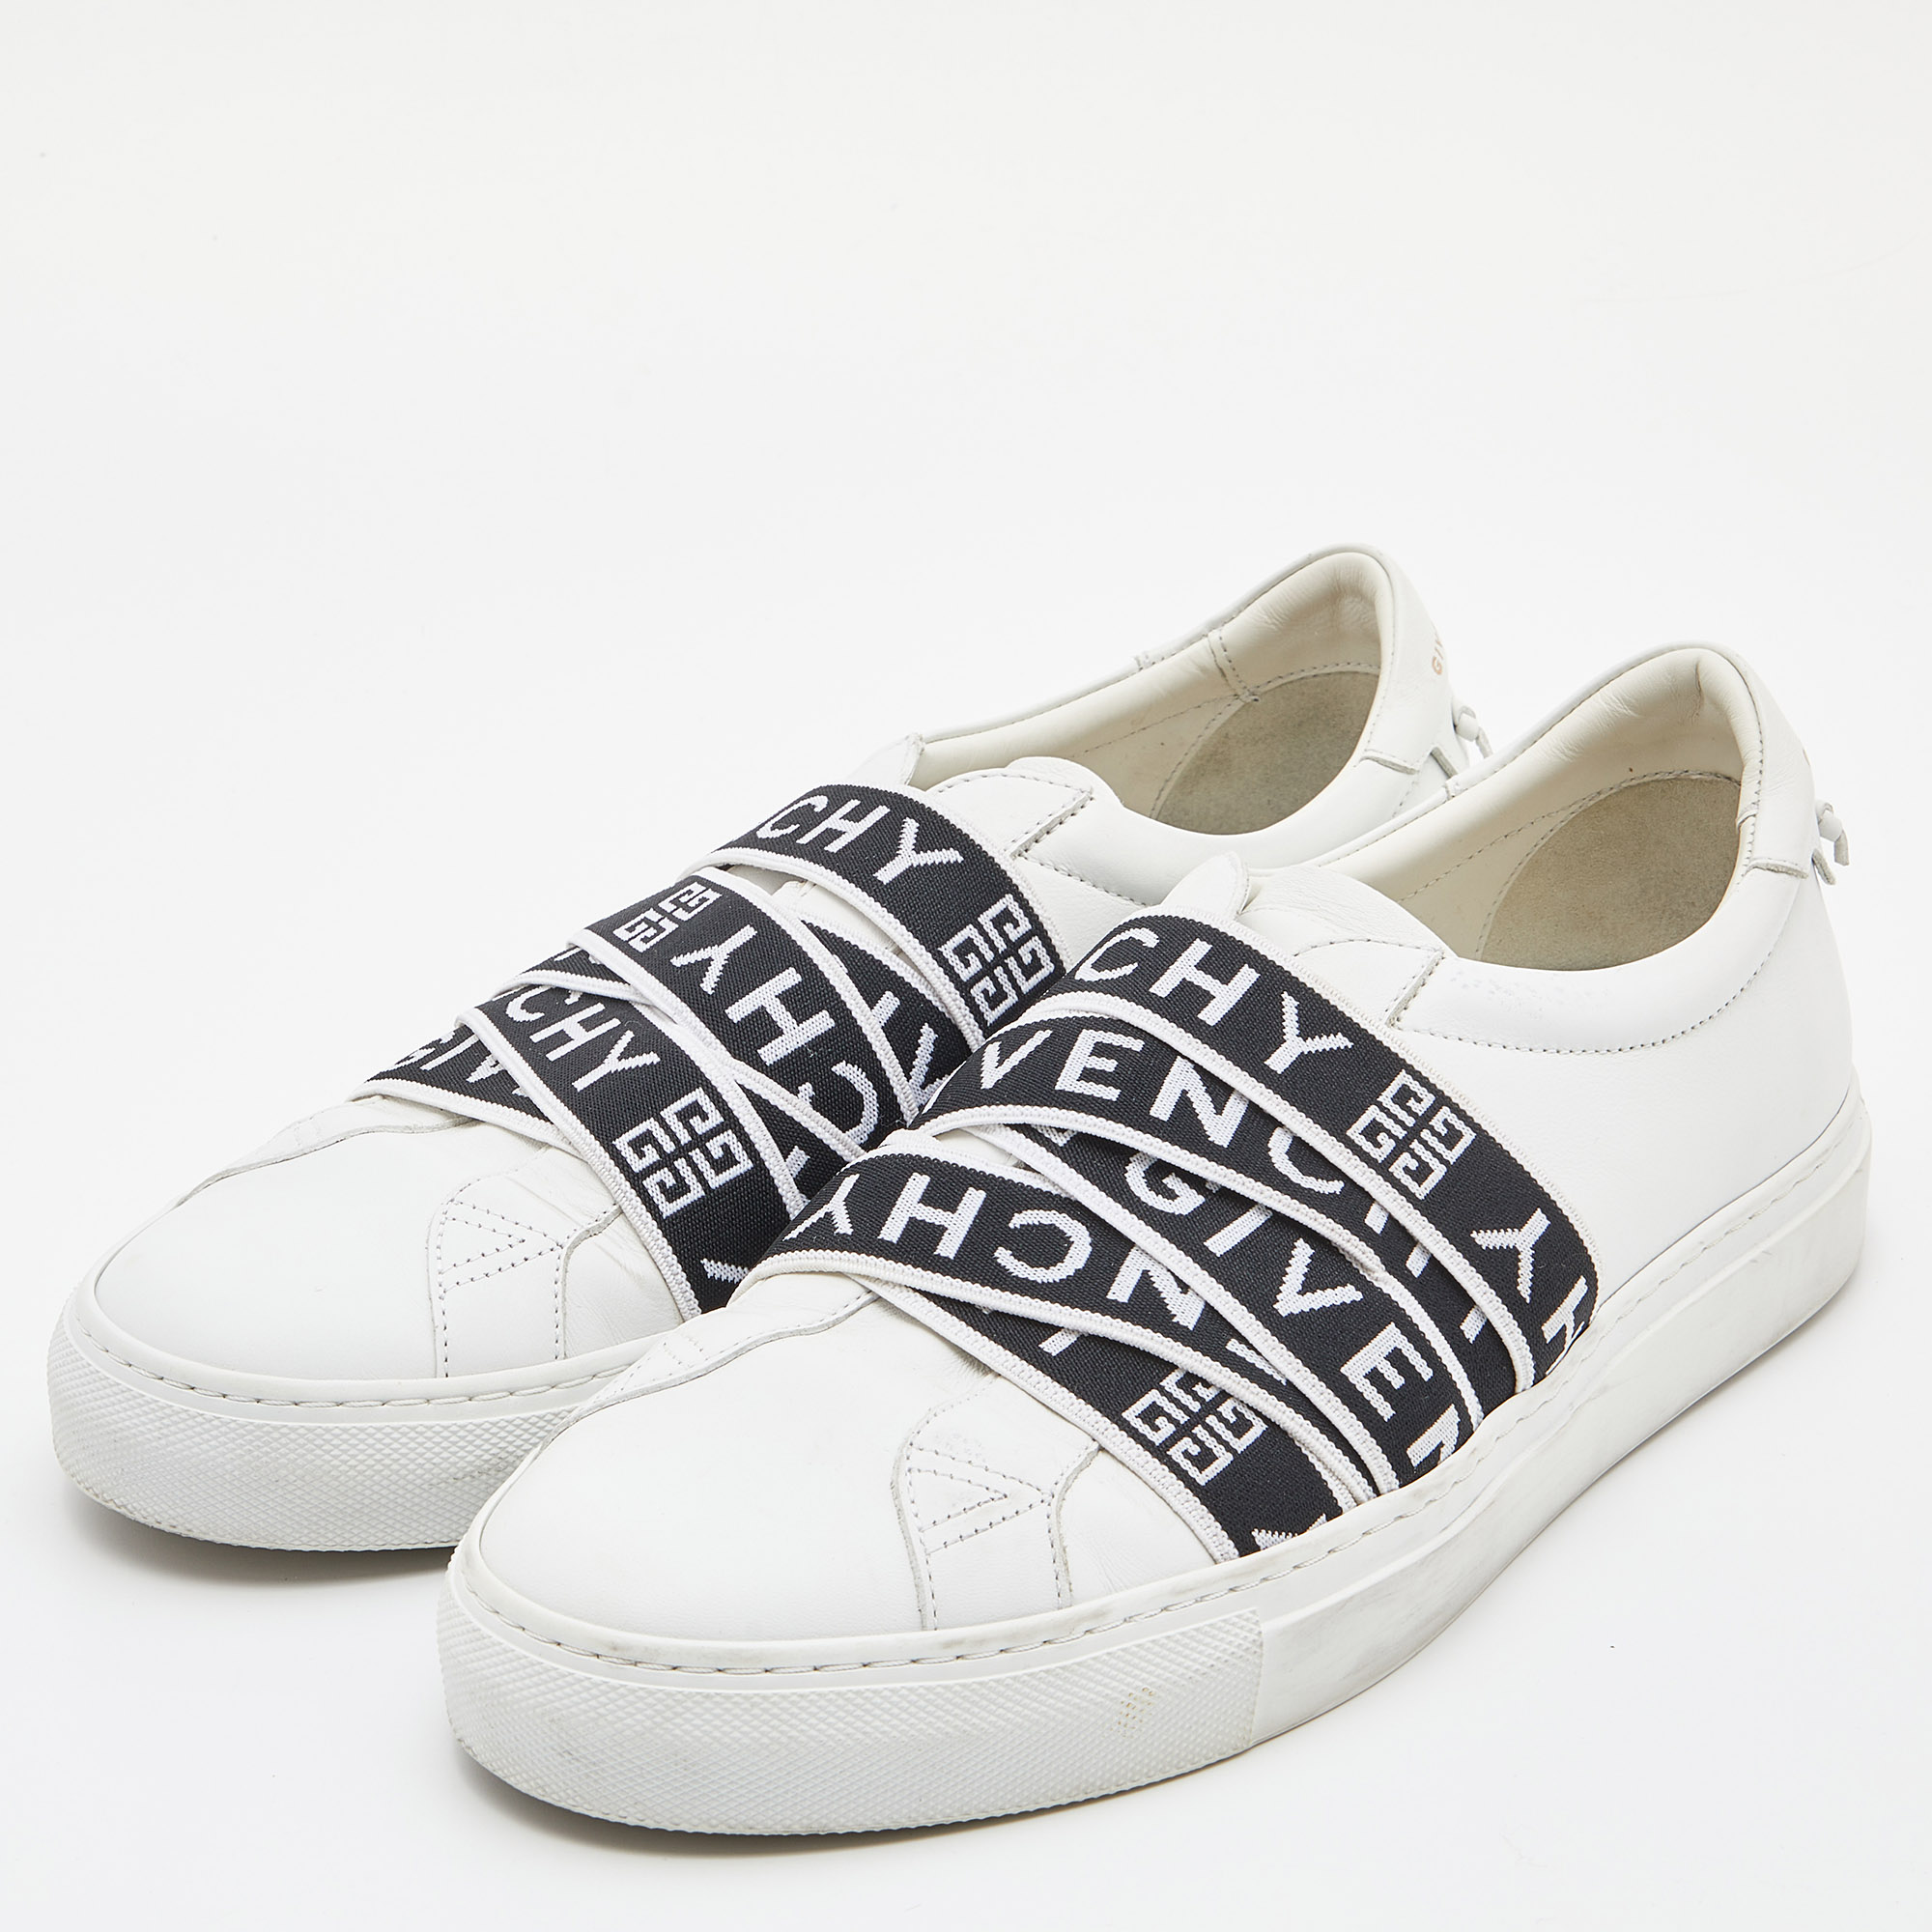 

Givenchy White Leather and Stretch Band Urban Street Slip On Sneakers Size